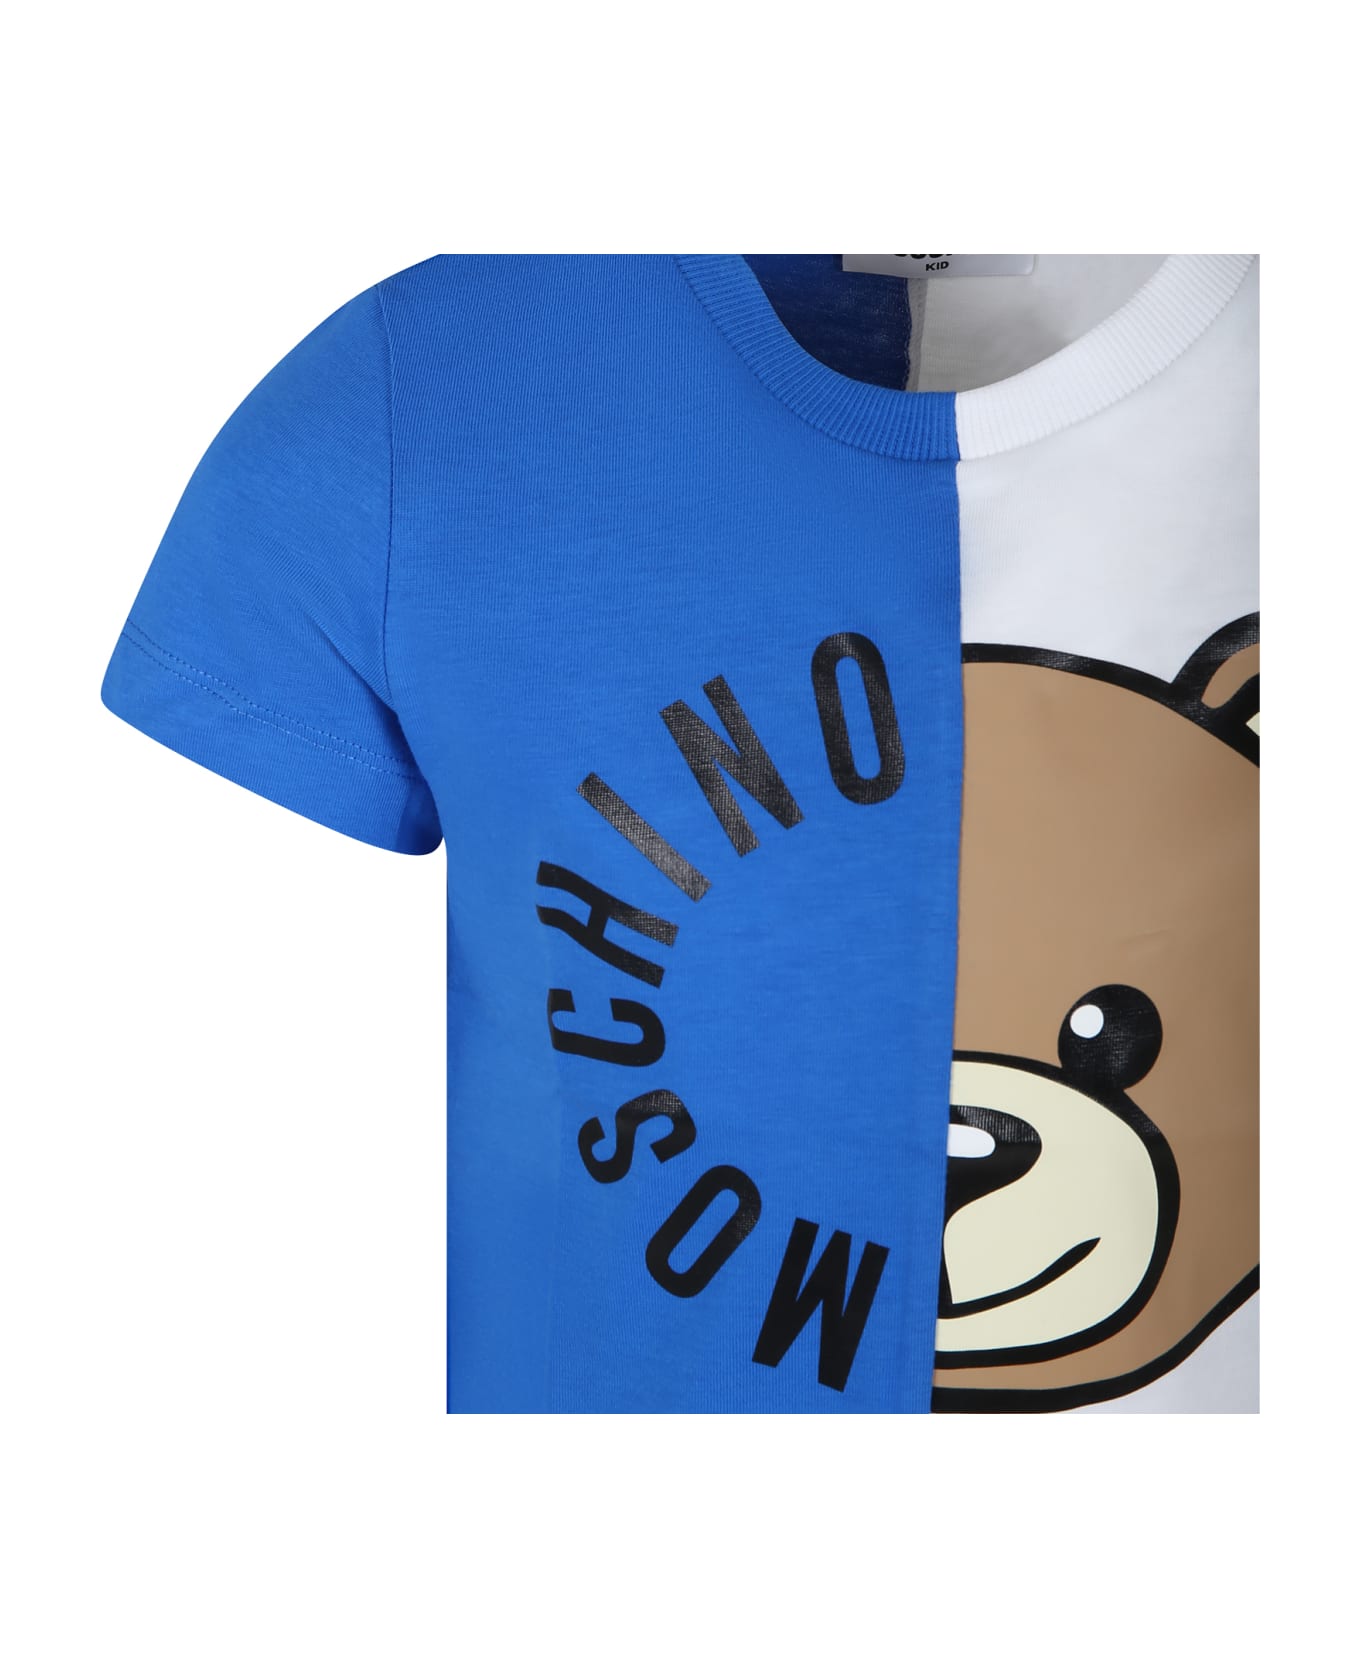 Moschino Blue T-shirt For Kids With Teddy Bear And Logo - Blue